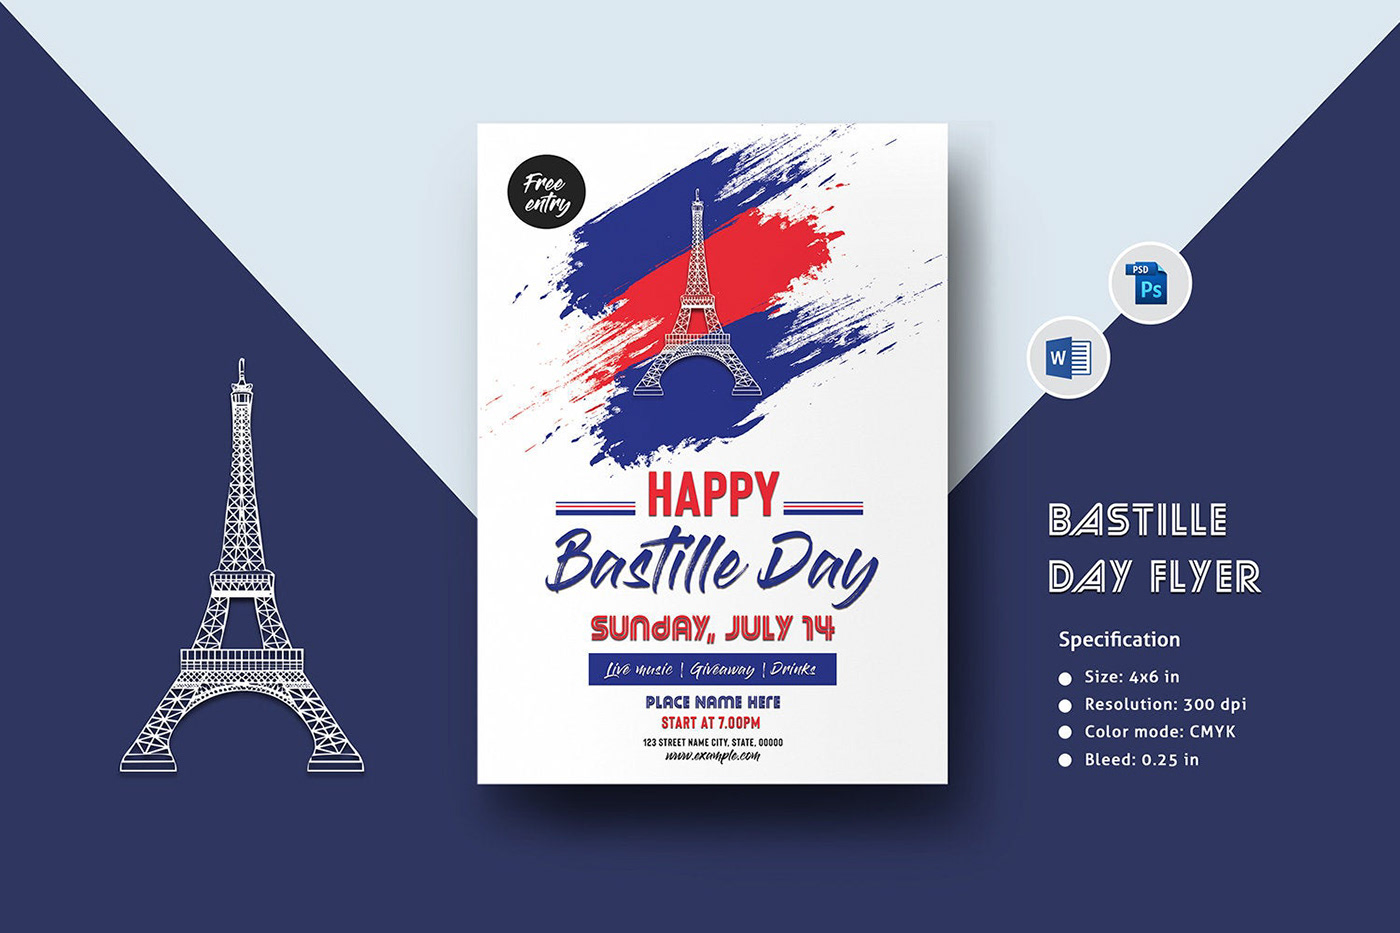 bastille day bastille event flyer invitation template French Party july 14th photoshop template ms word celebration poster